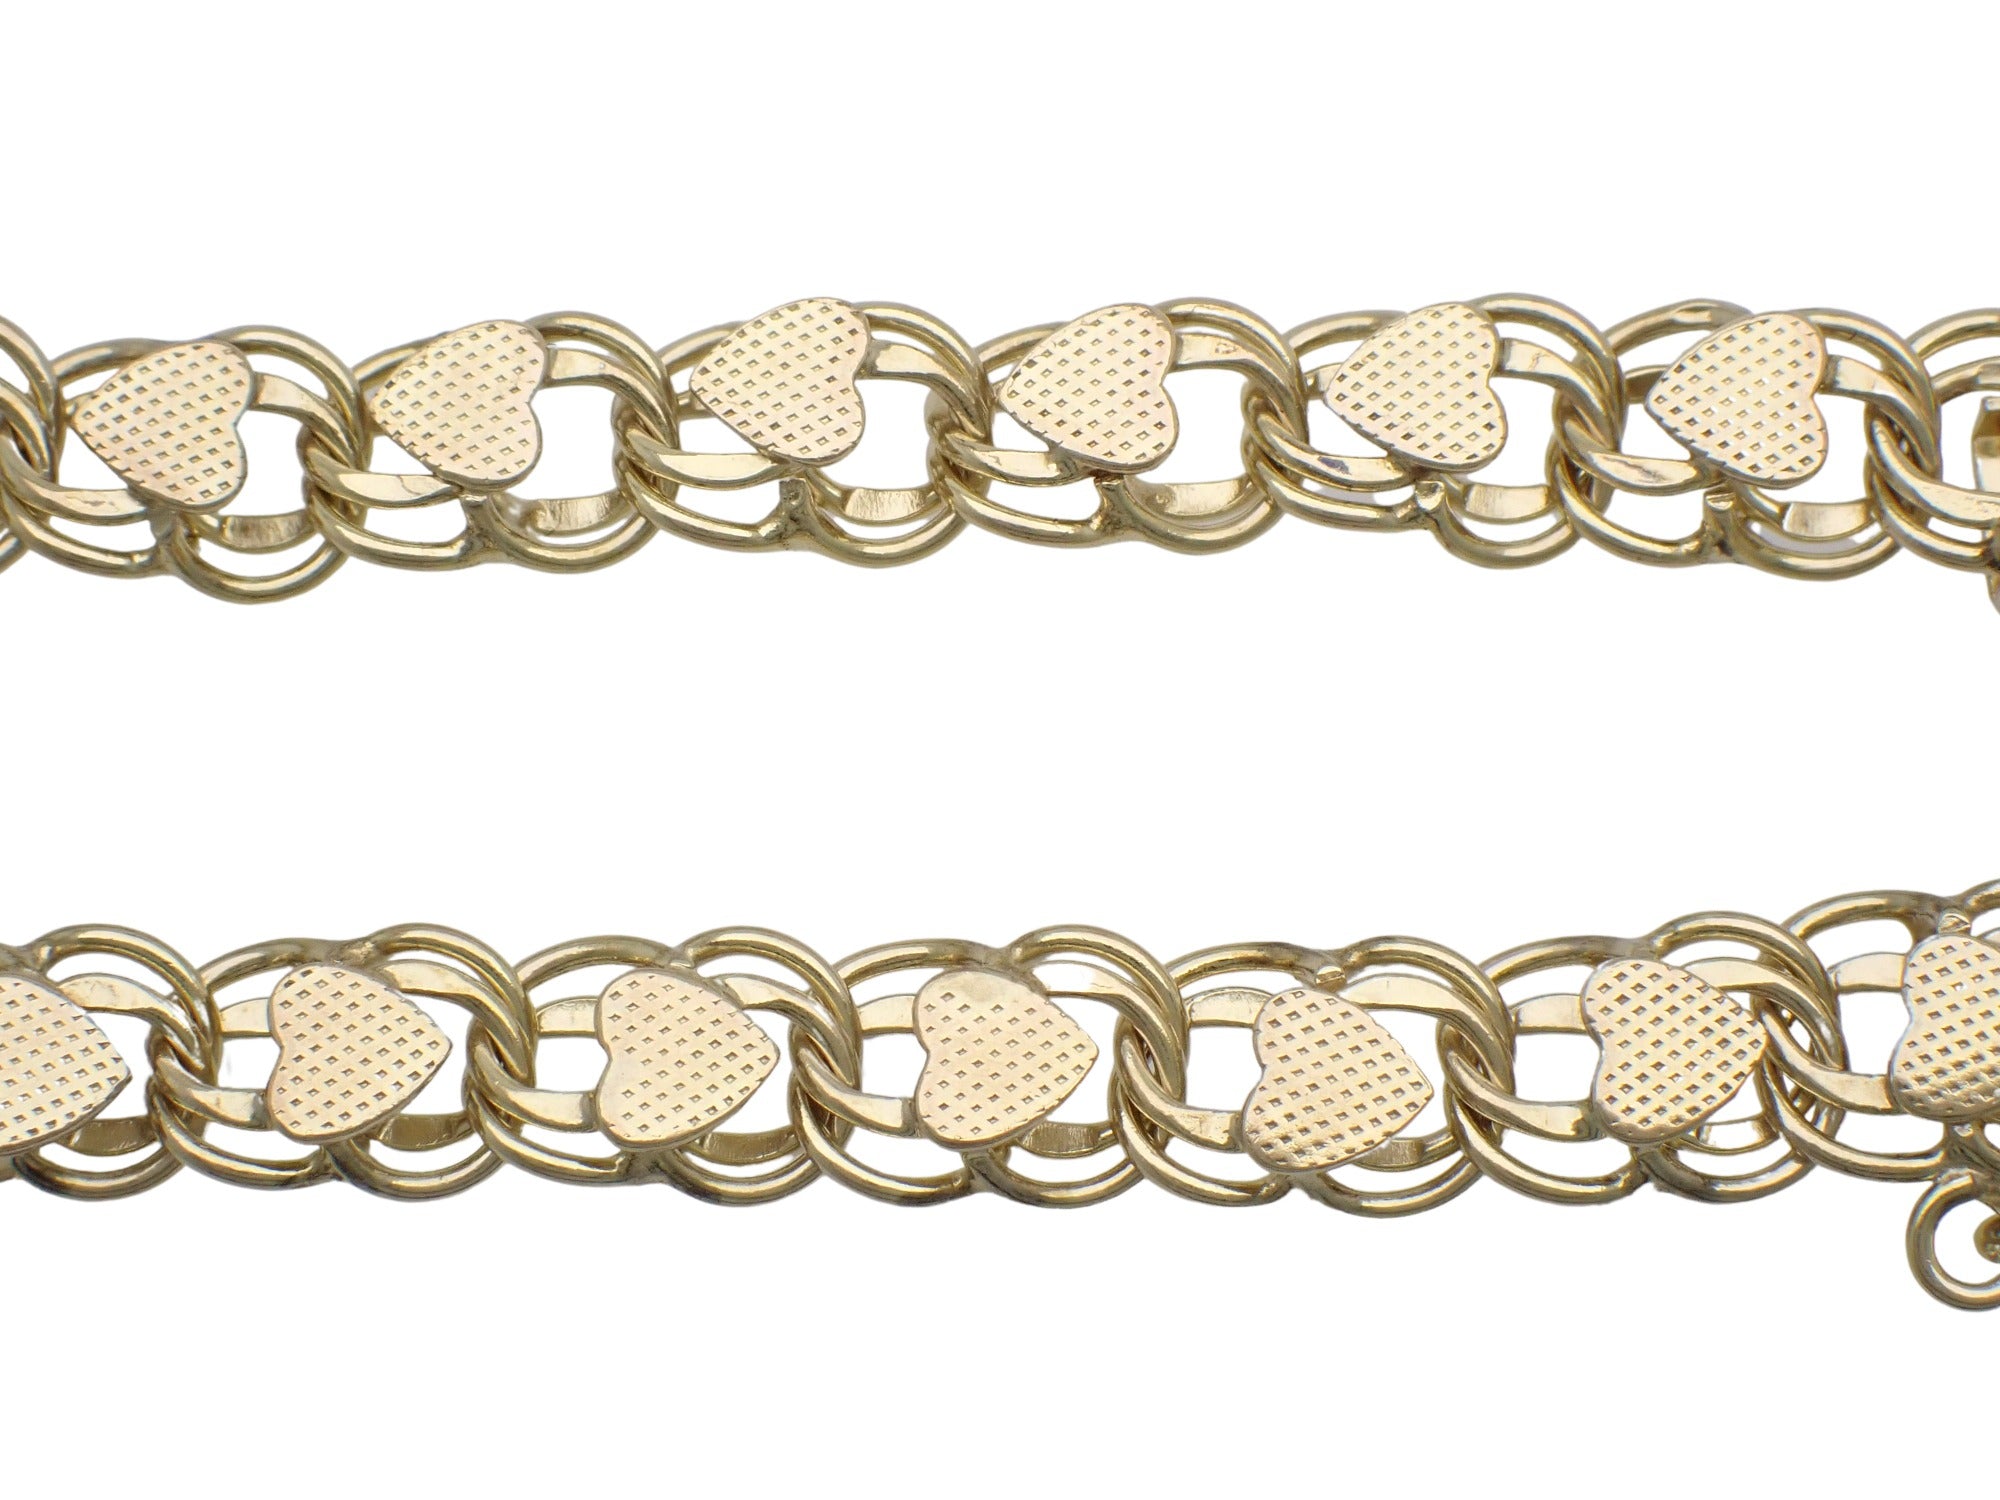 Linked Hearts 1960's Vintage 12K Yellow Gold Filled Double Link Charm Bracelet - 7 Inches - Item: SSBR4 - Image: 2